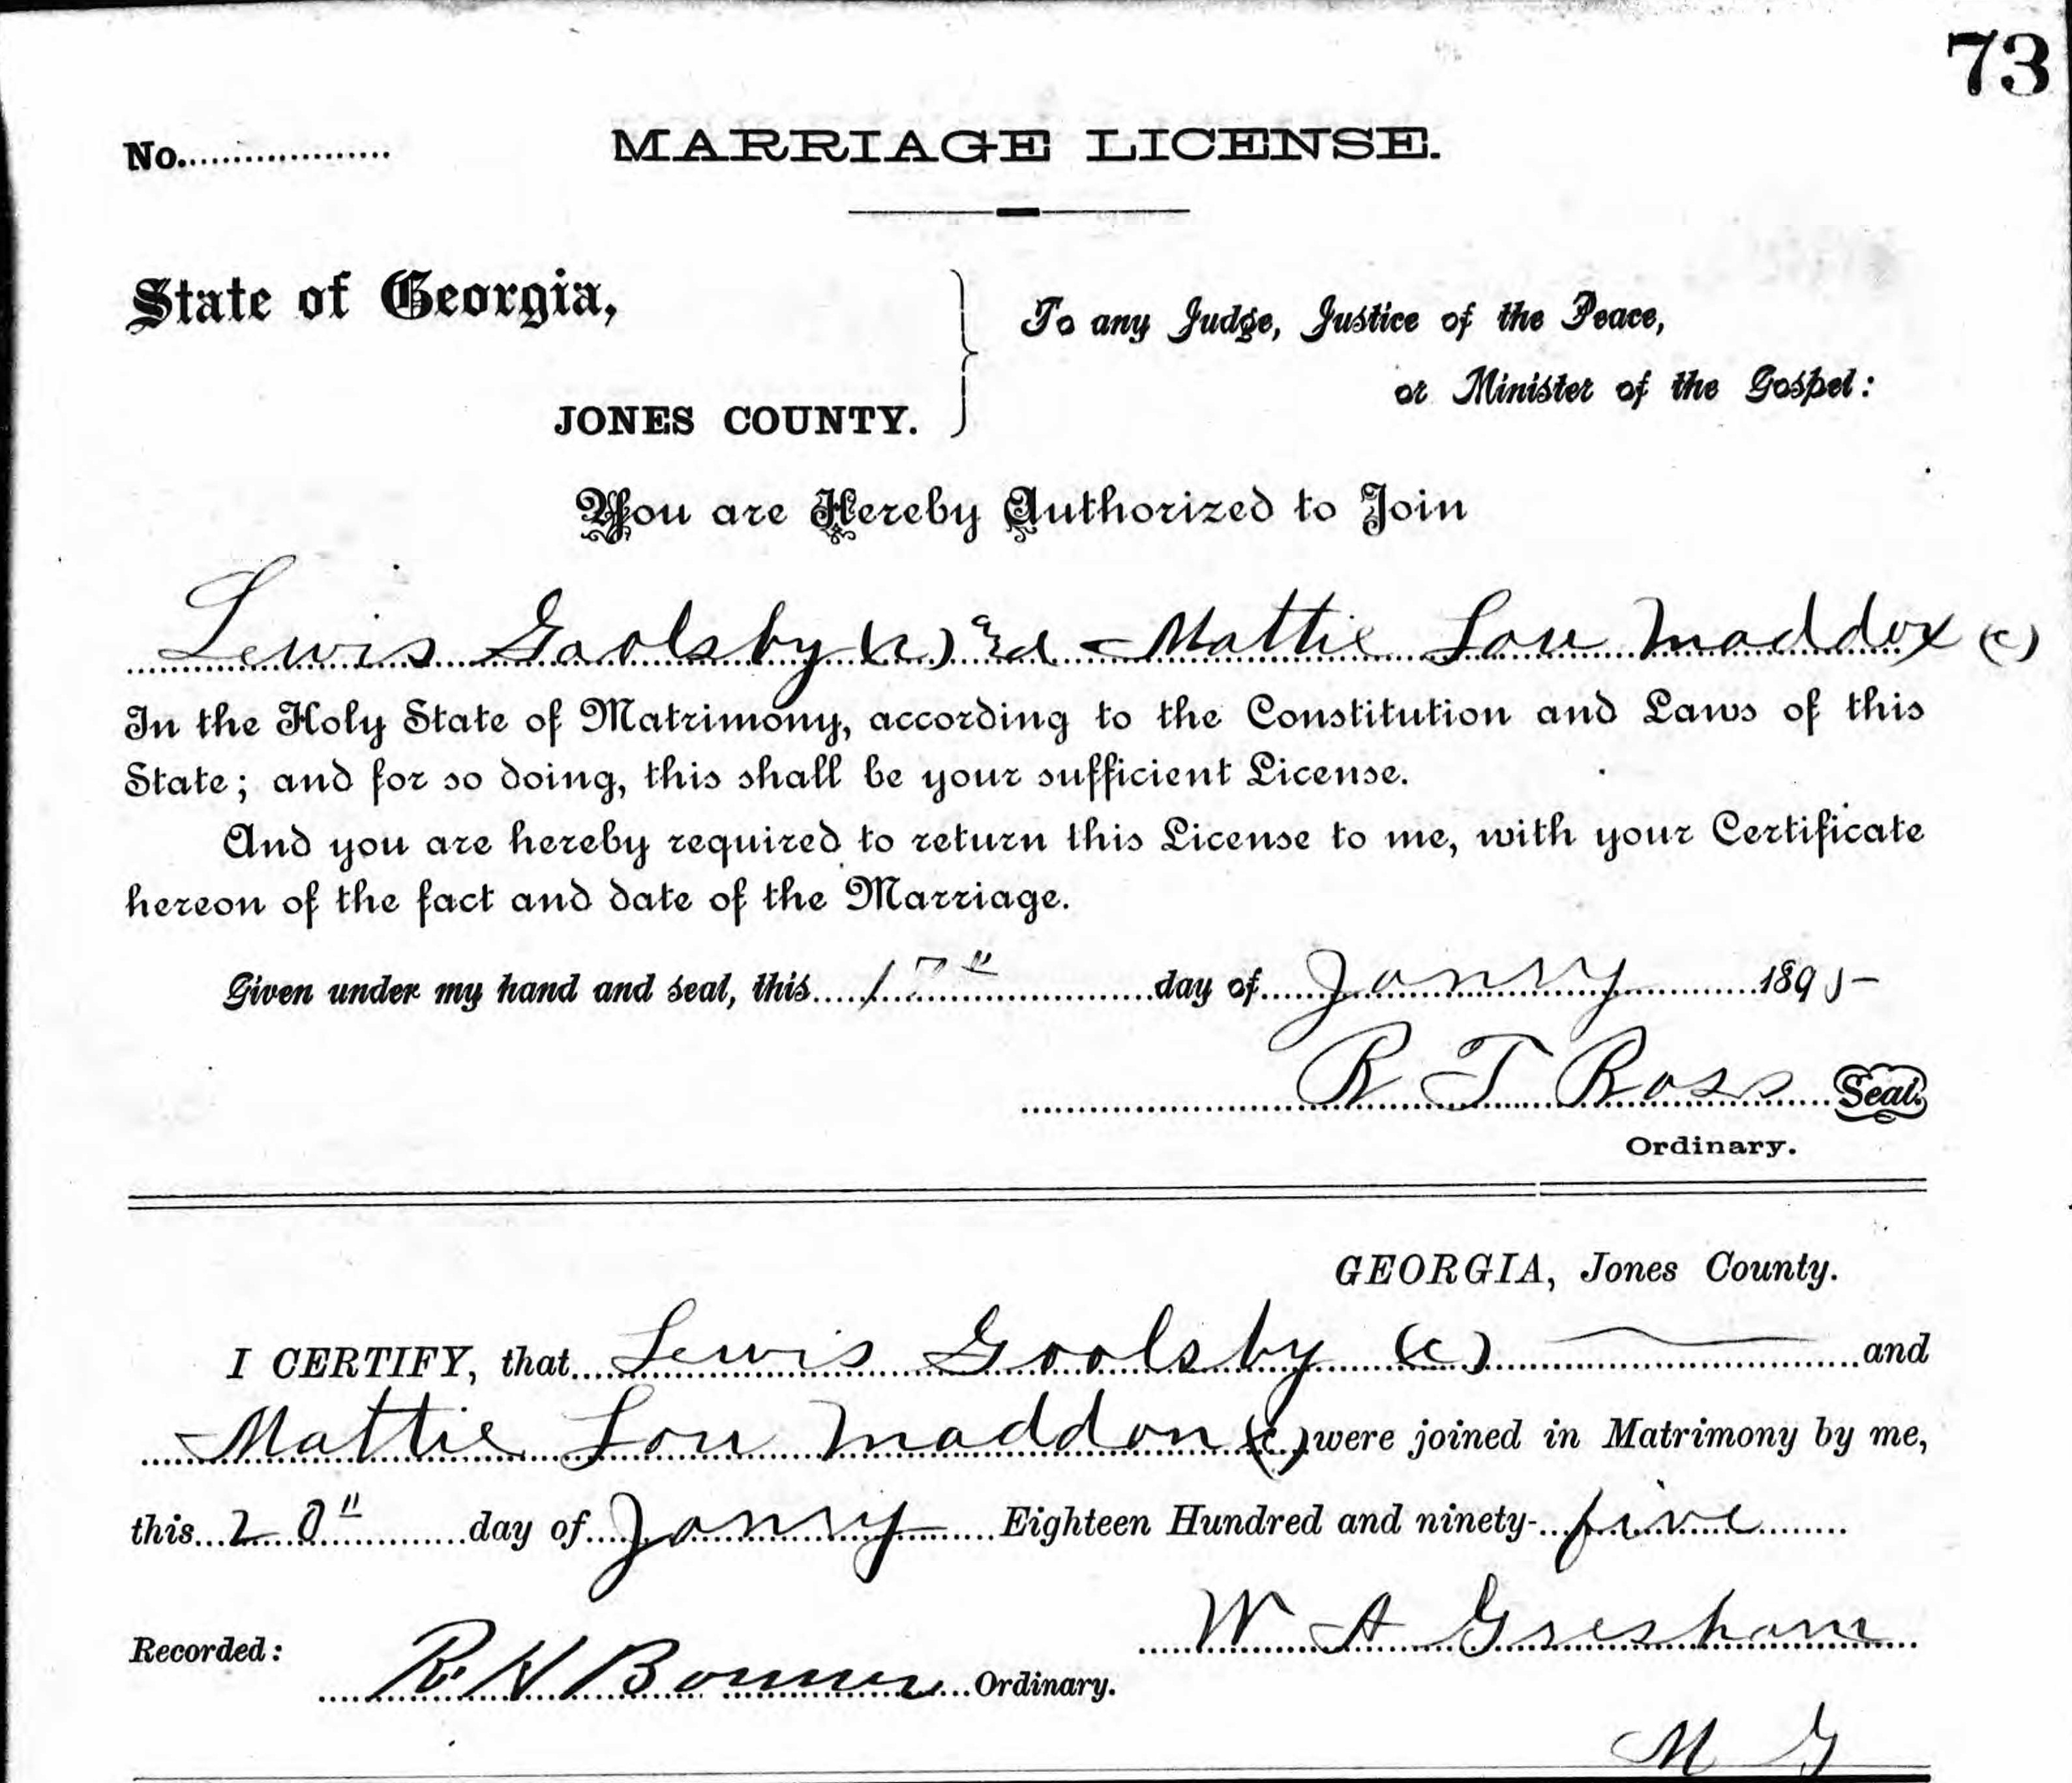 MARRIAGE CERTIFICATE - Mattie L Maddox to Lewis Goolsby